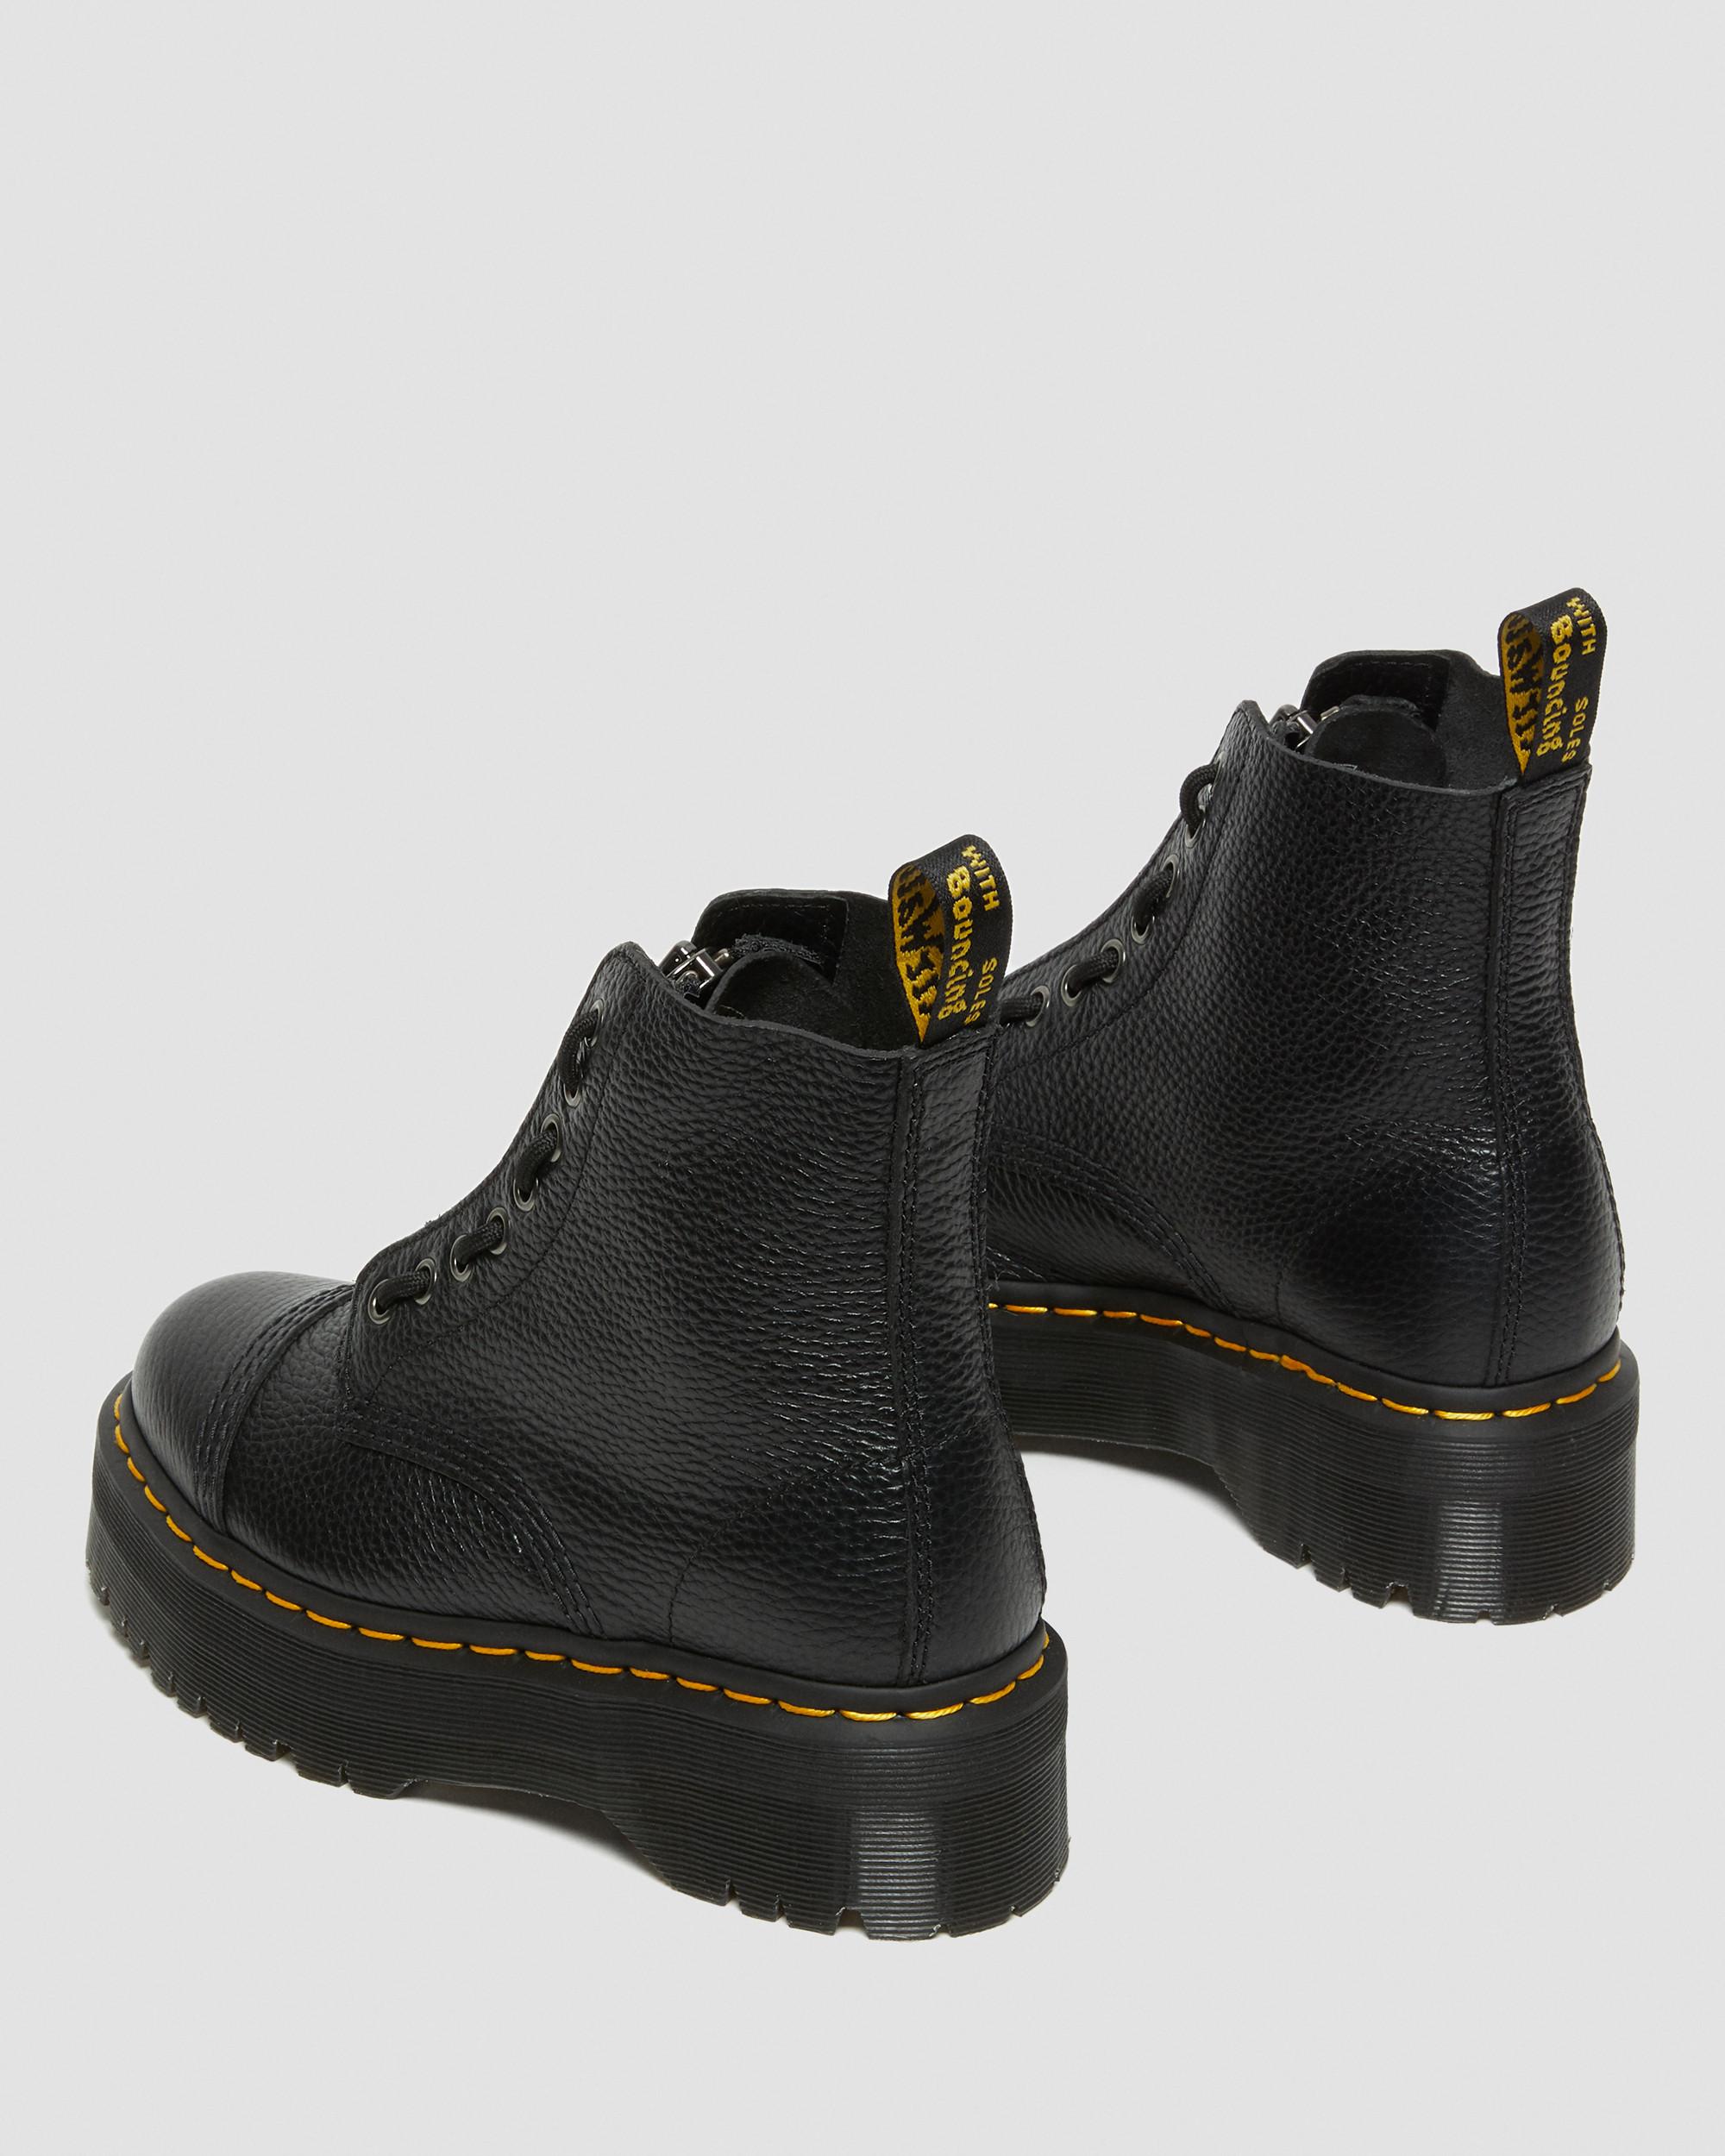 Sinclair Milled Nappa Leather Boots